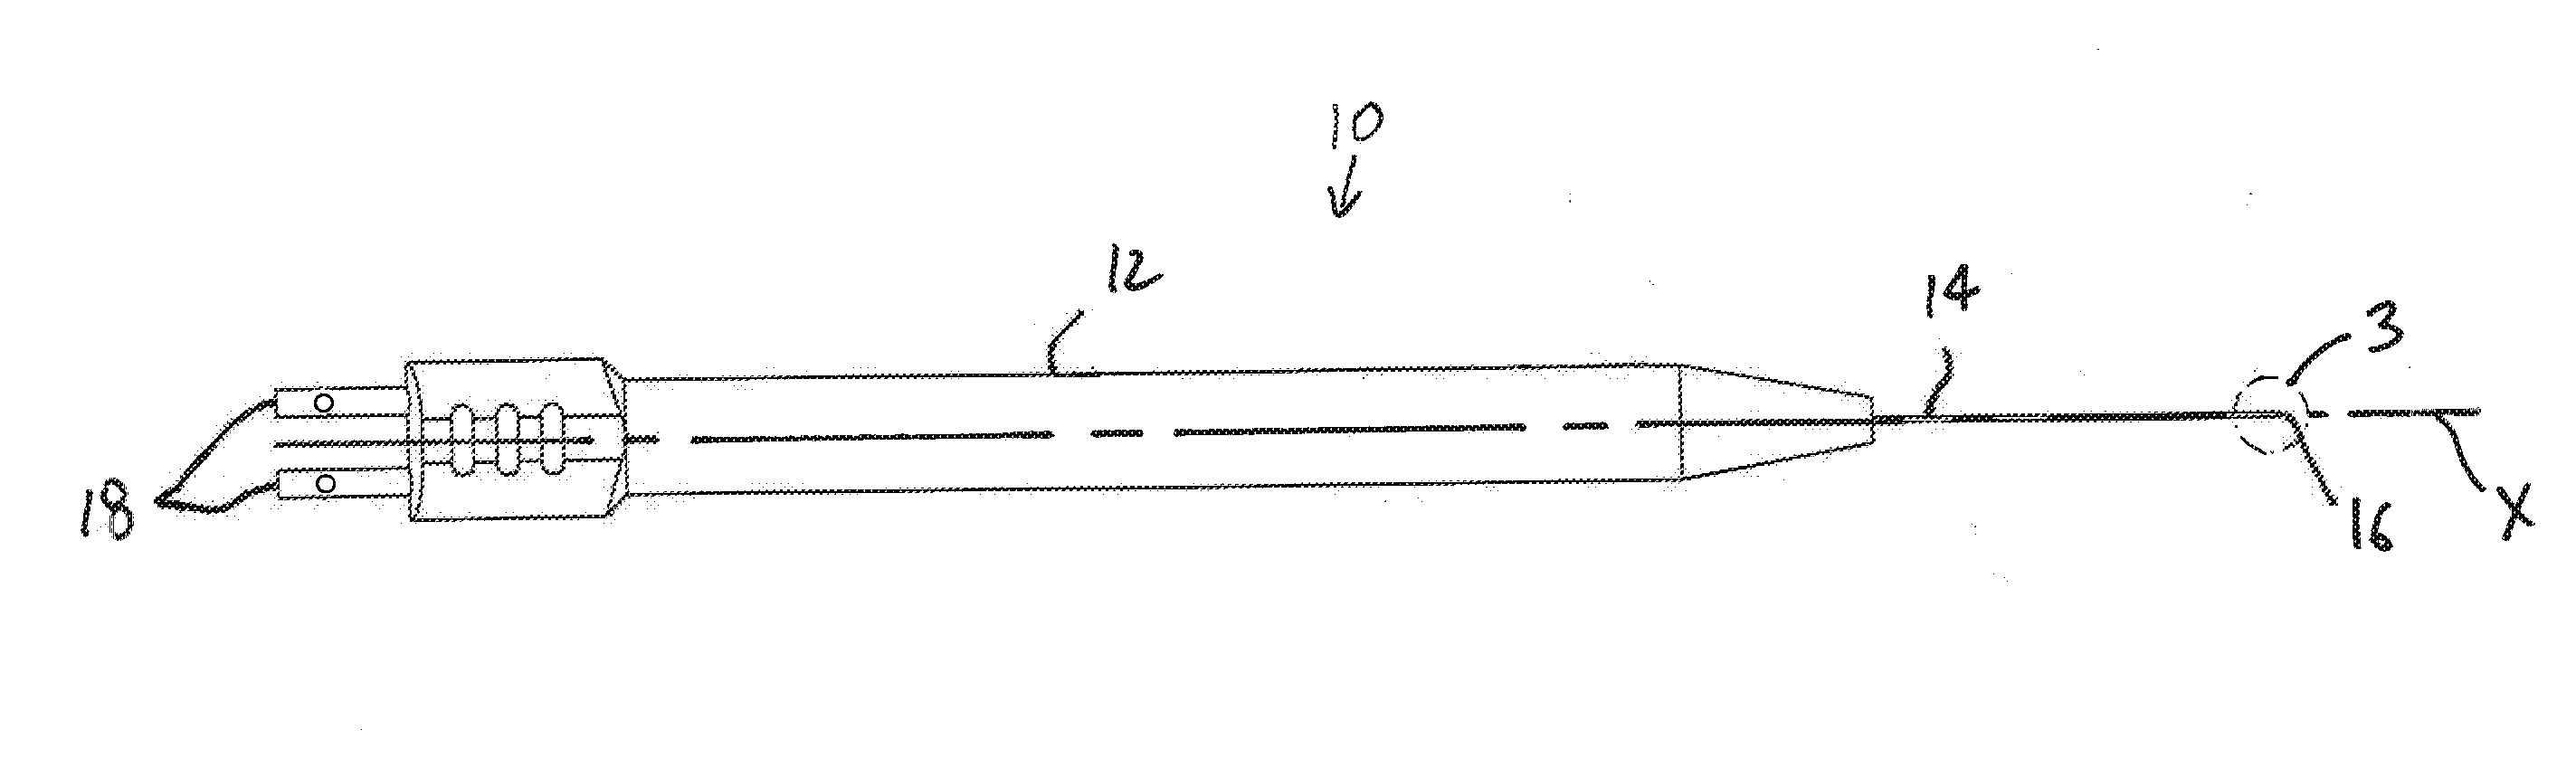 Method of, and device for, marking a patient's eye for reference during a toric lens implantation procedure